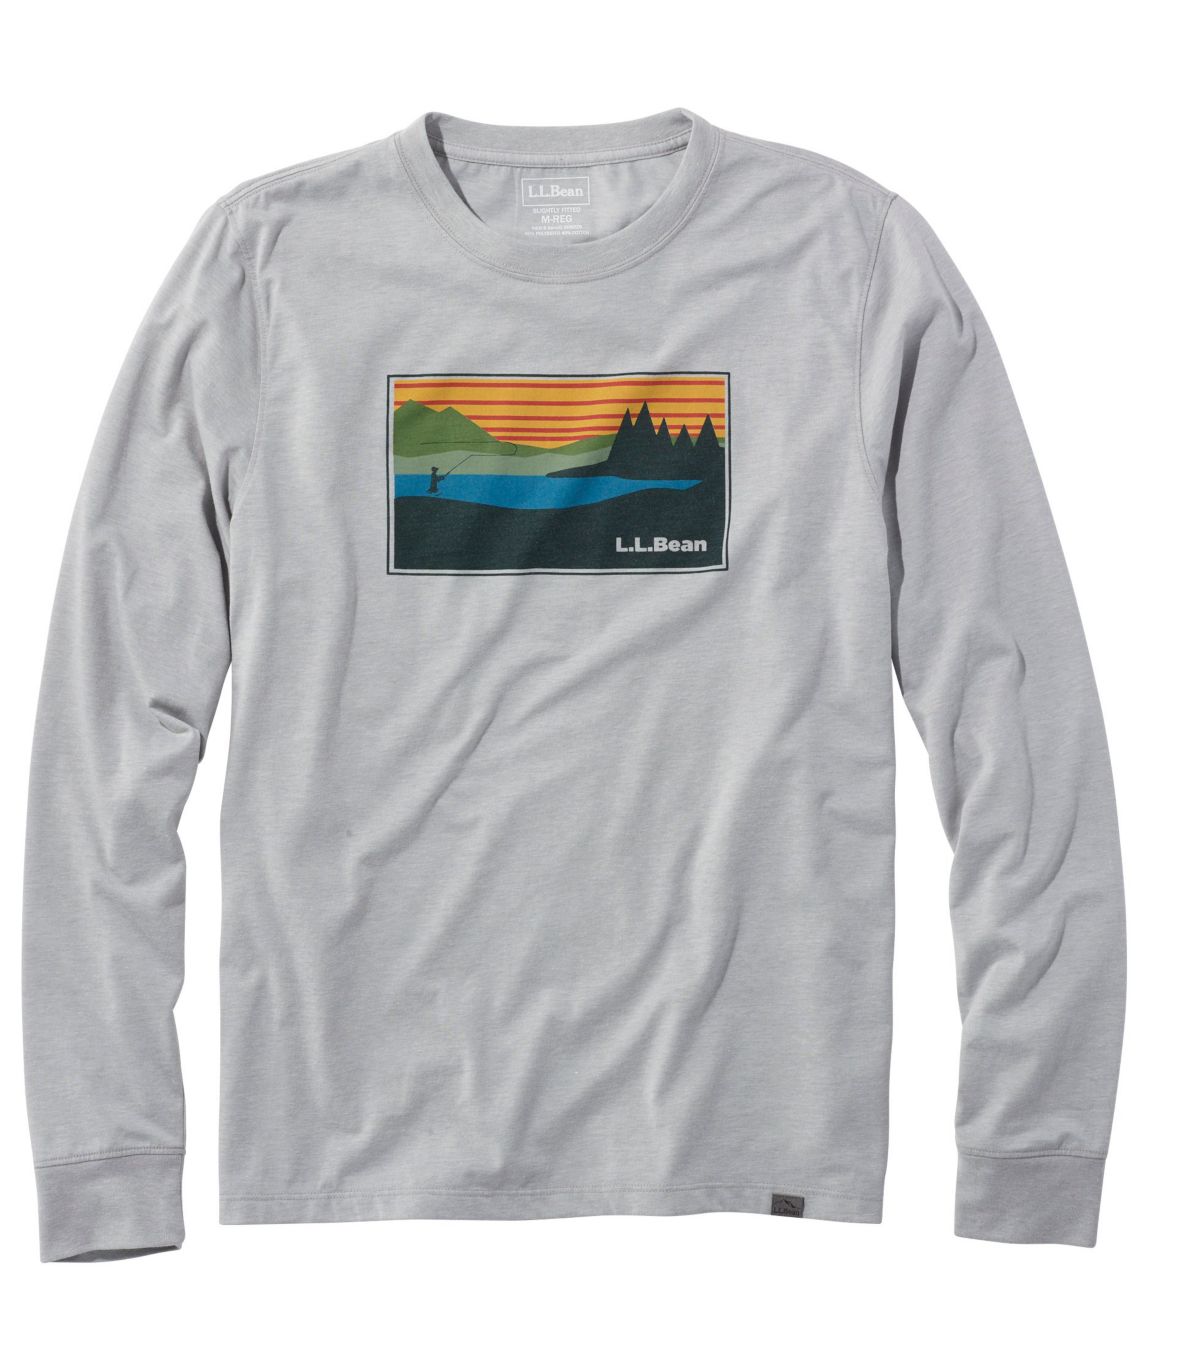 Men's Technical Fishing Graphic Tees, Long-Sleeve